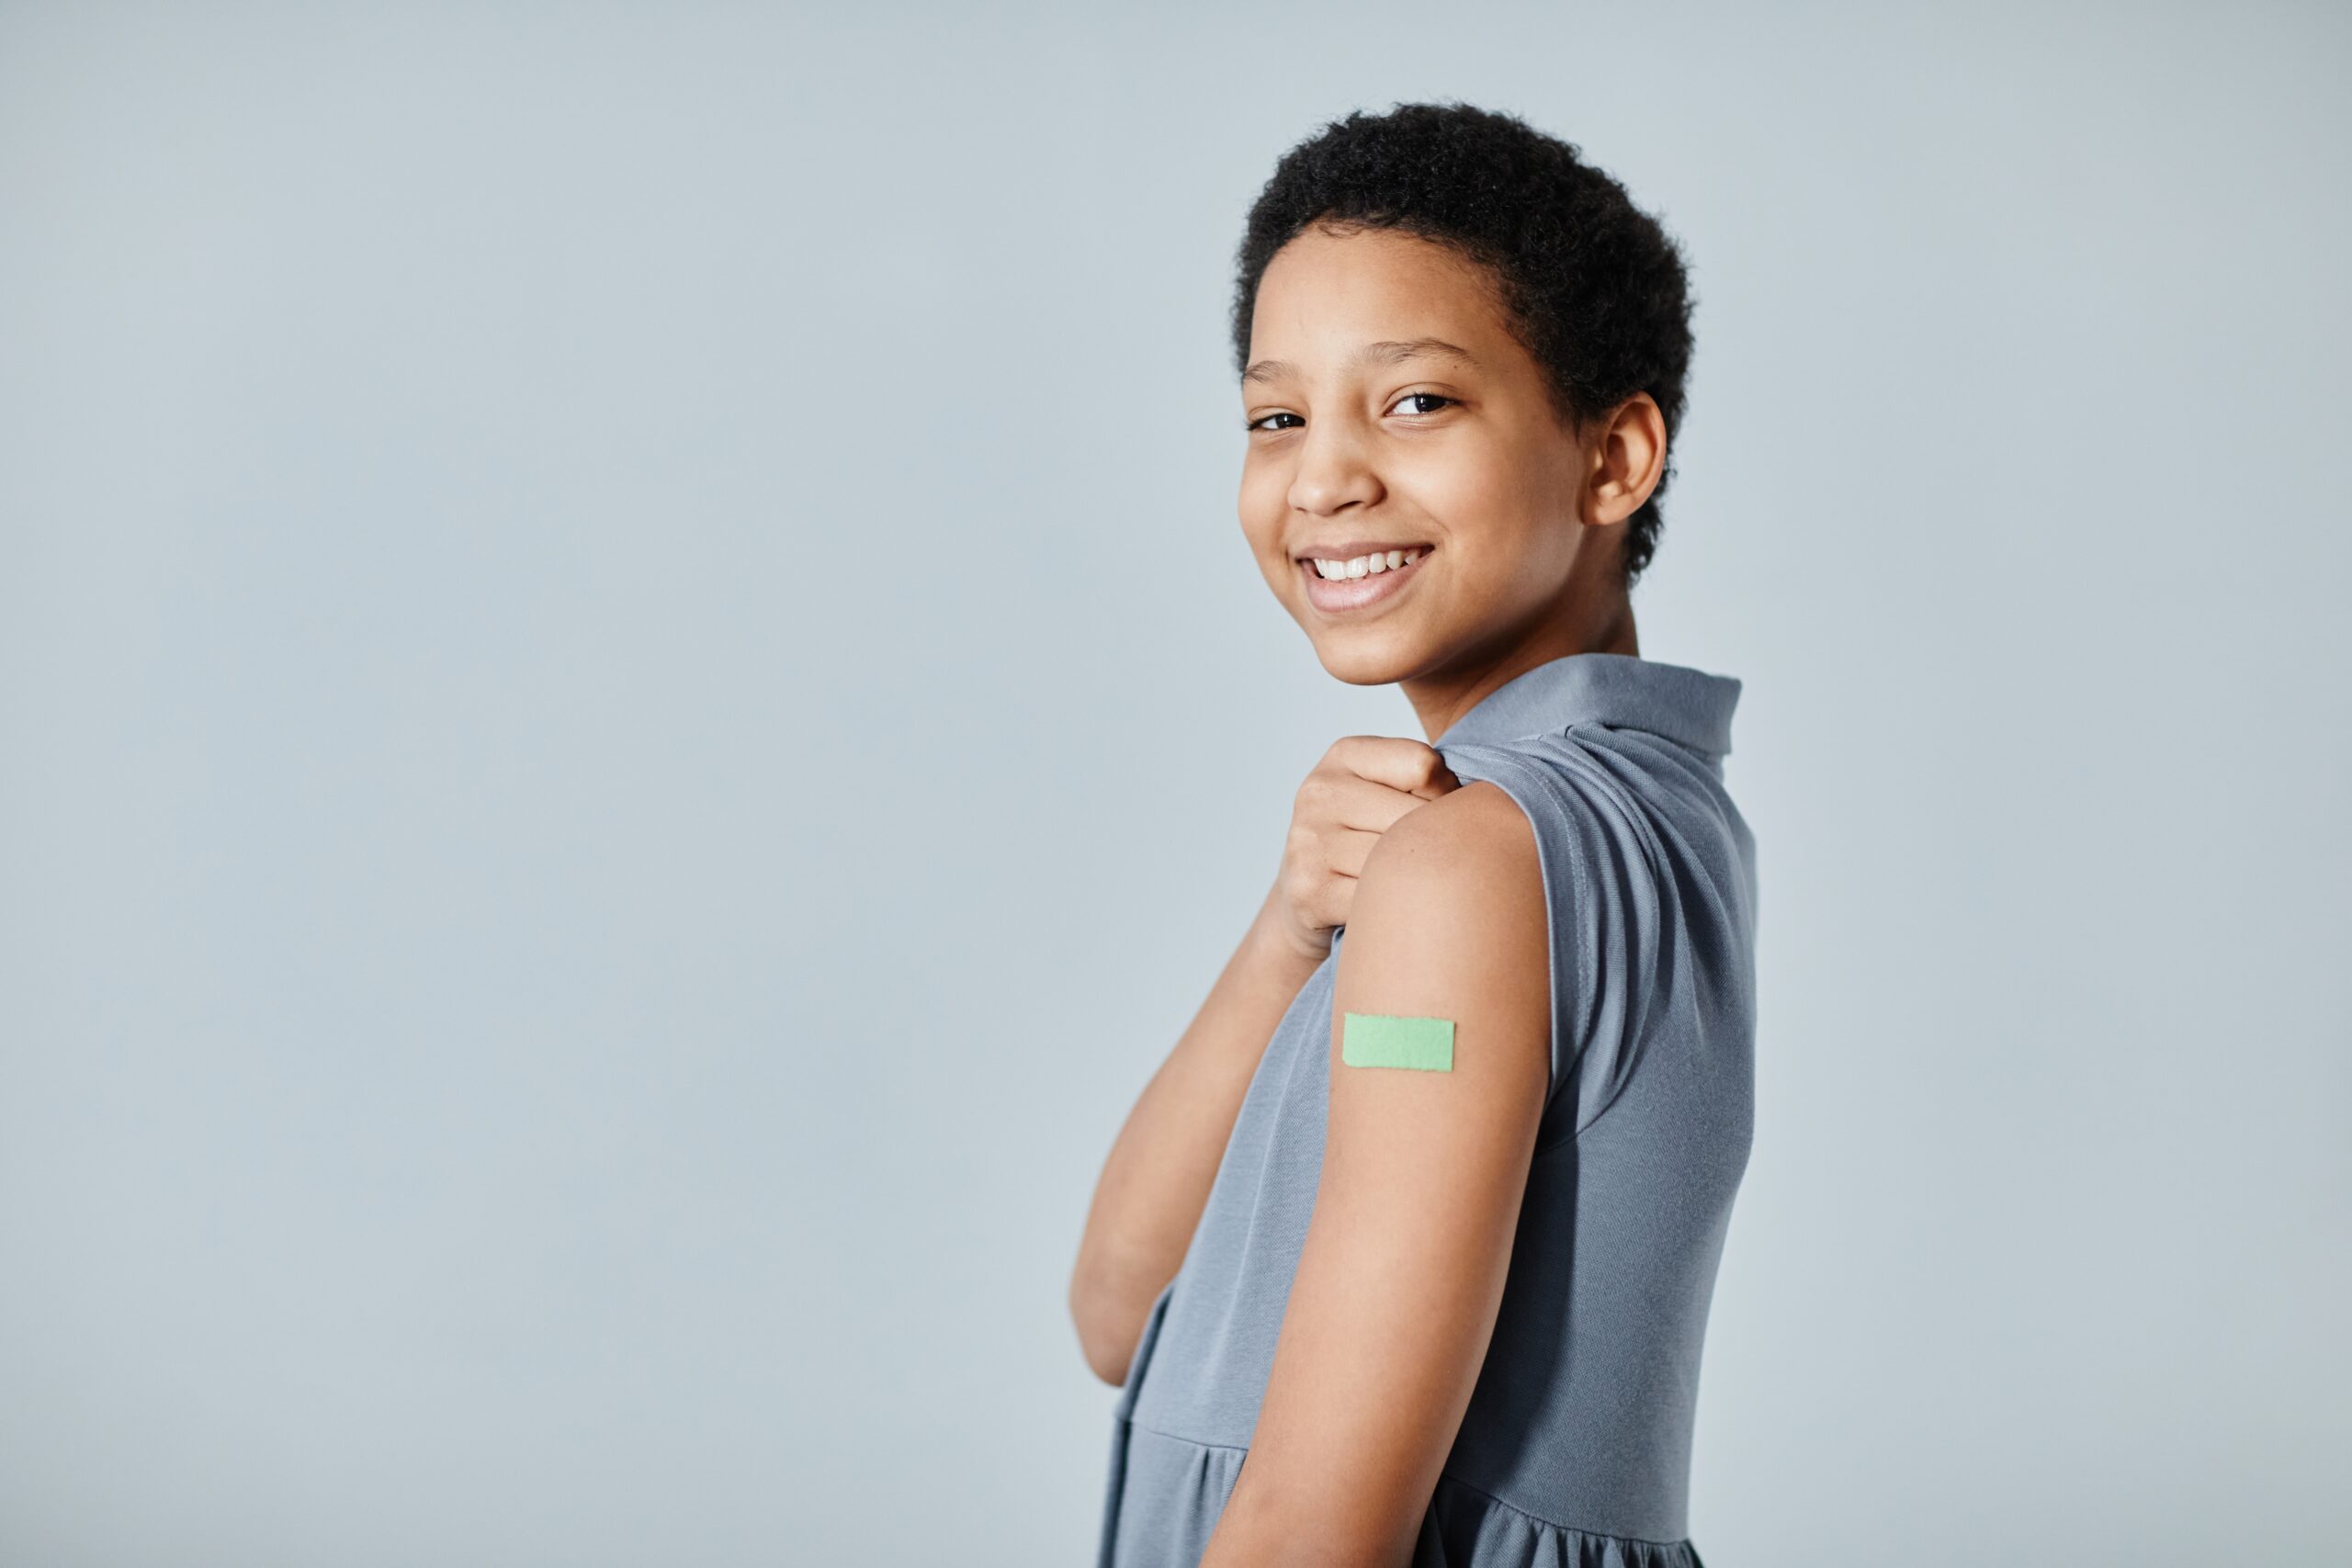 Boy smiling with a bandaid on his arm